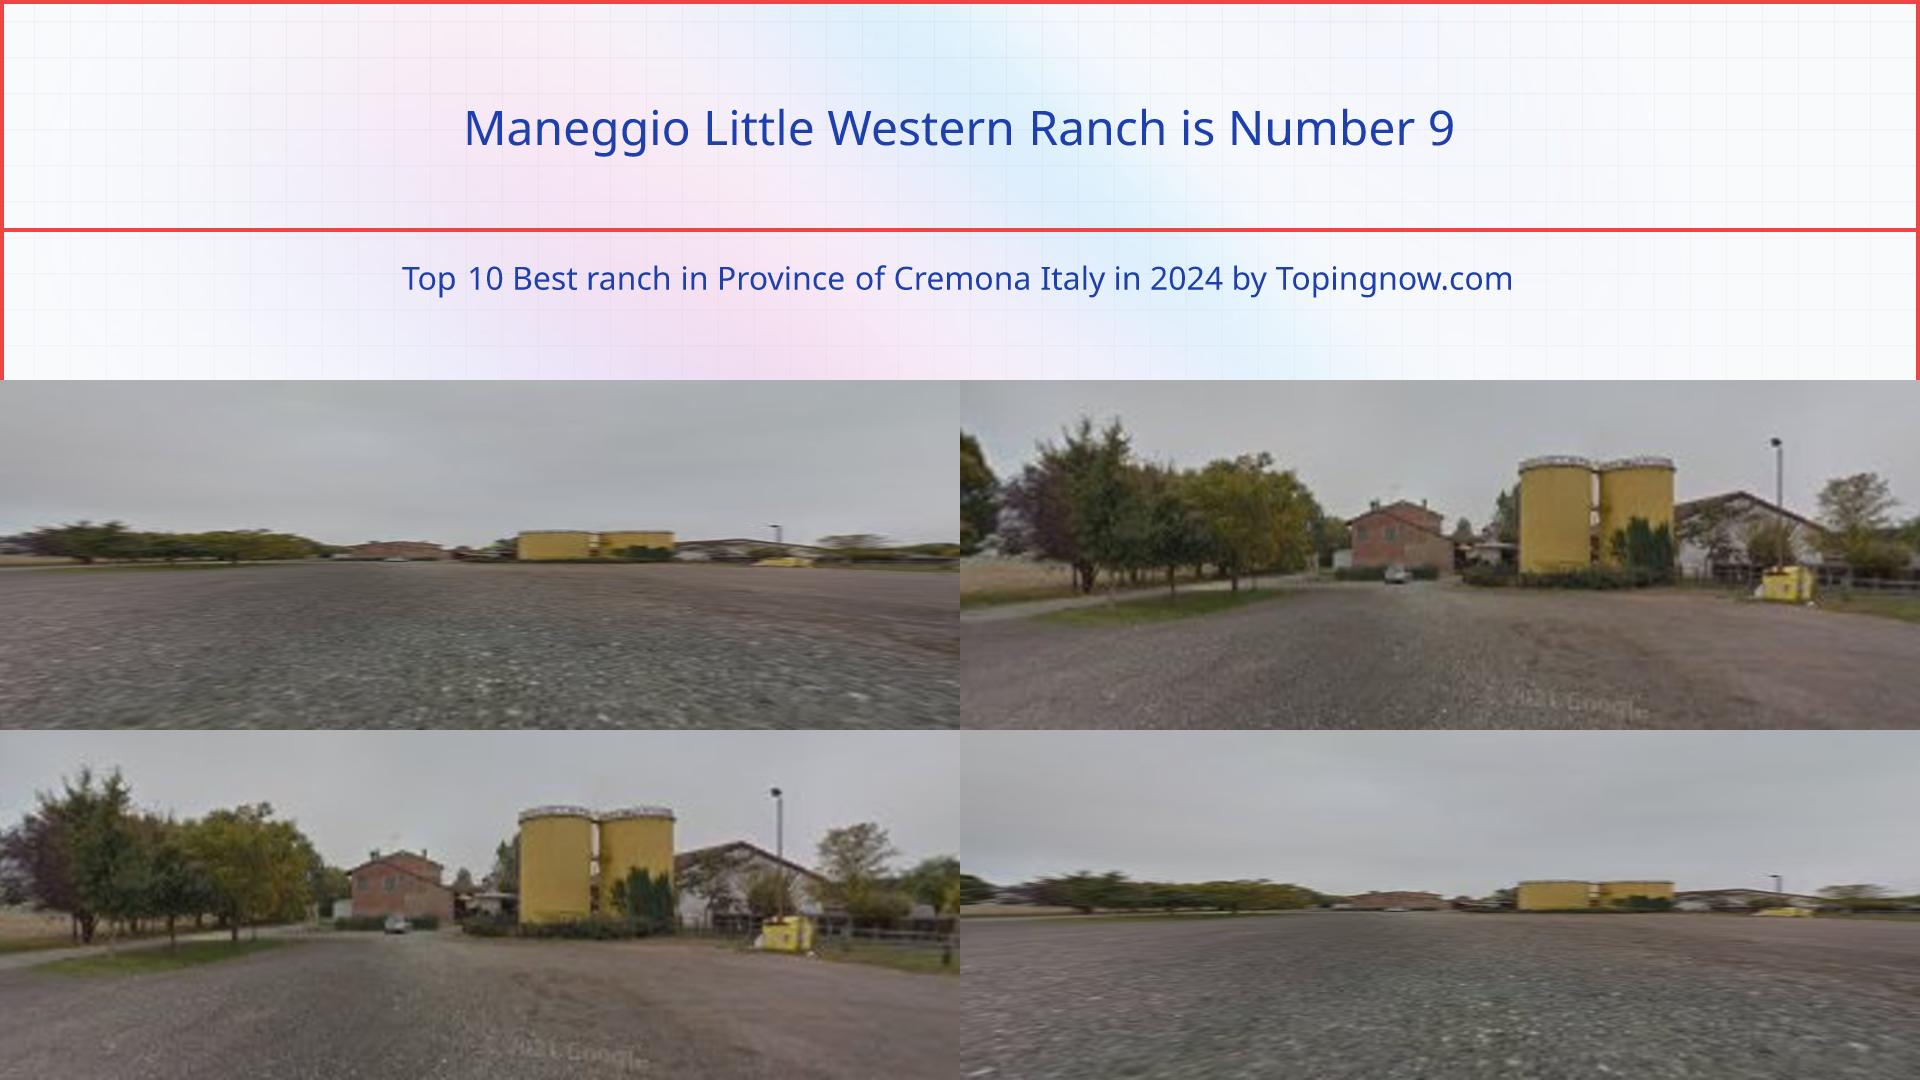 Maneggio Little Western Ranch: Top 10 Best ranch in Province of Cremona Italy in 2024